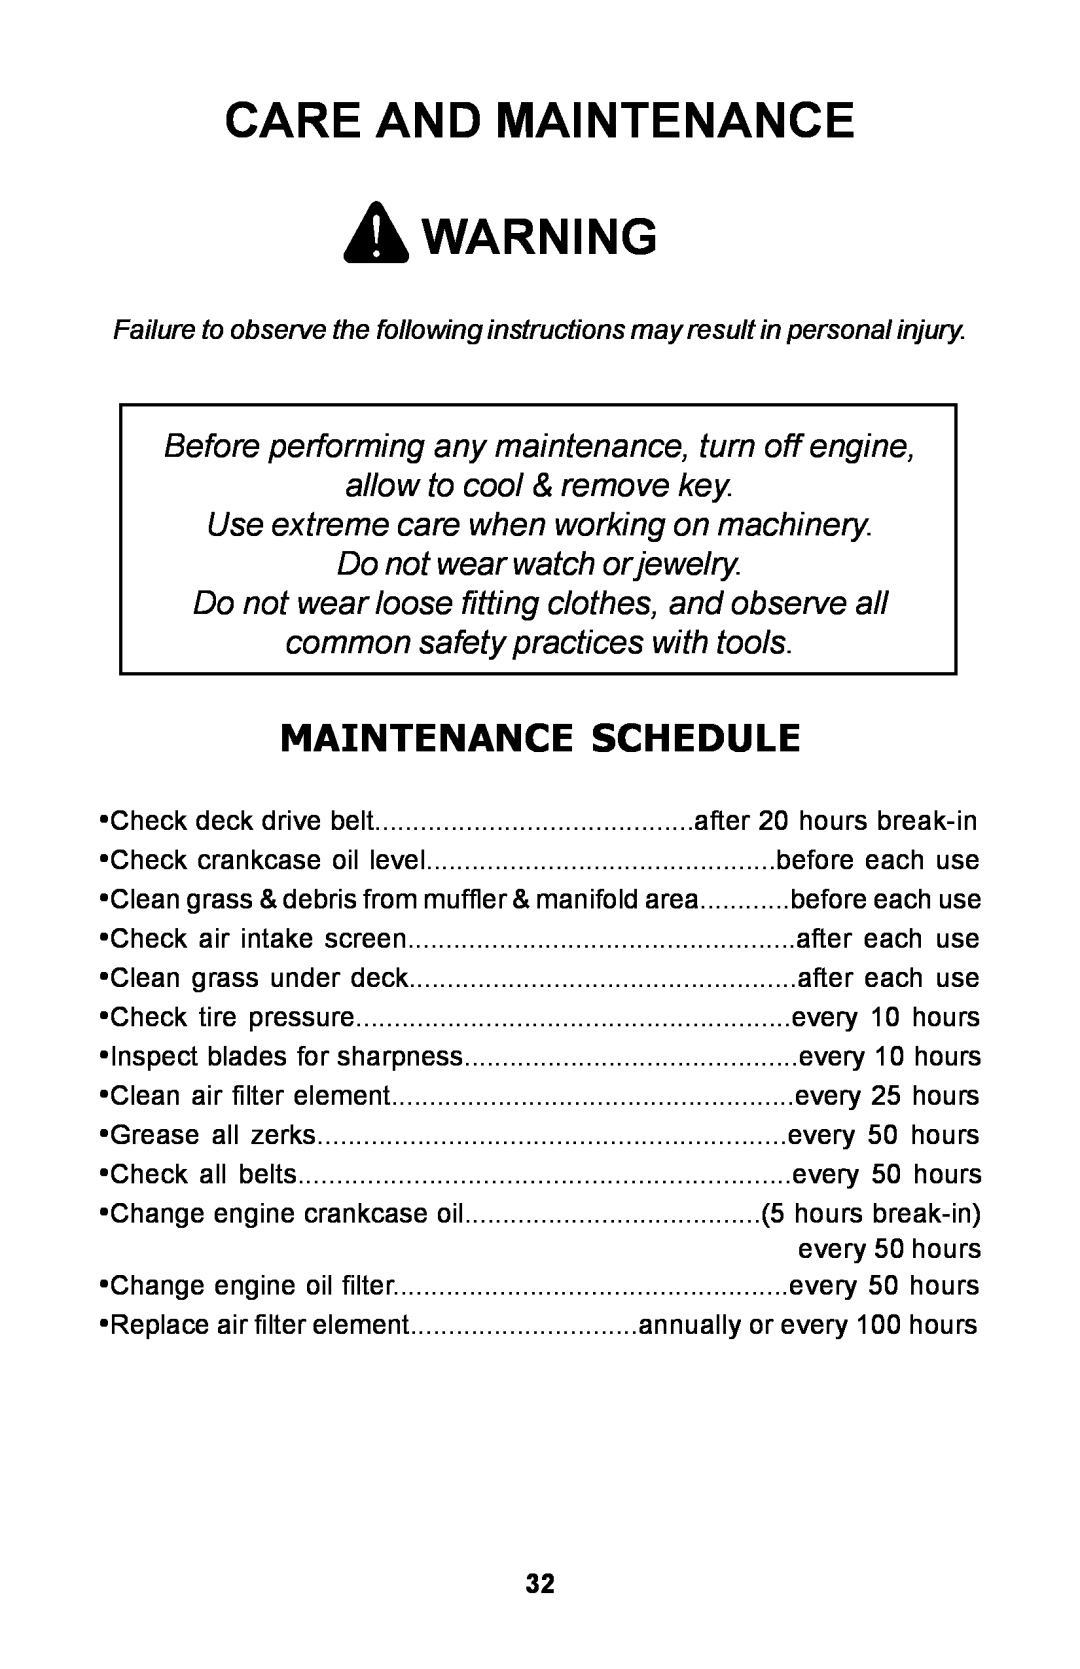 Dixon 30 manual Care And Maintenance, Maintenance Schedule, allow to cool & remove key, Do not wear watch or jewelry 